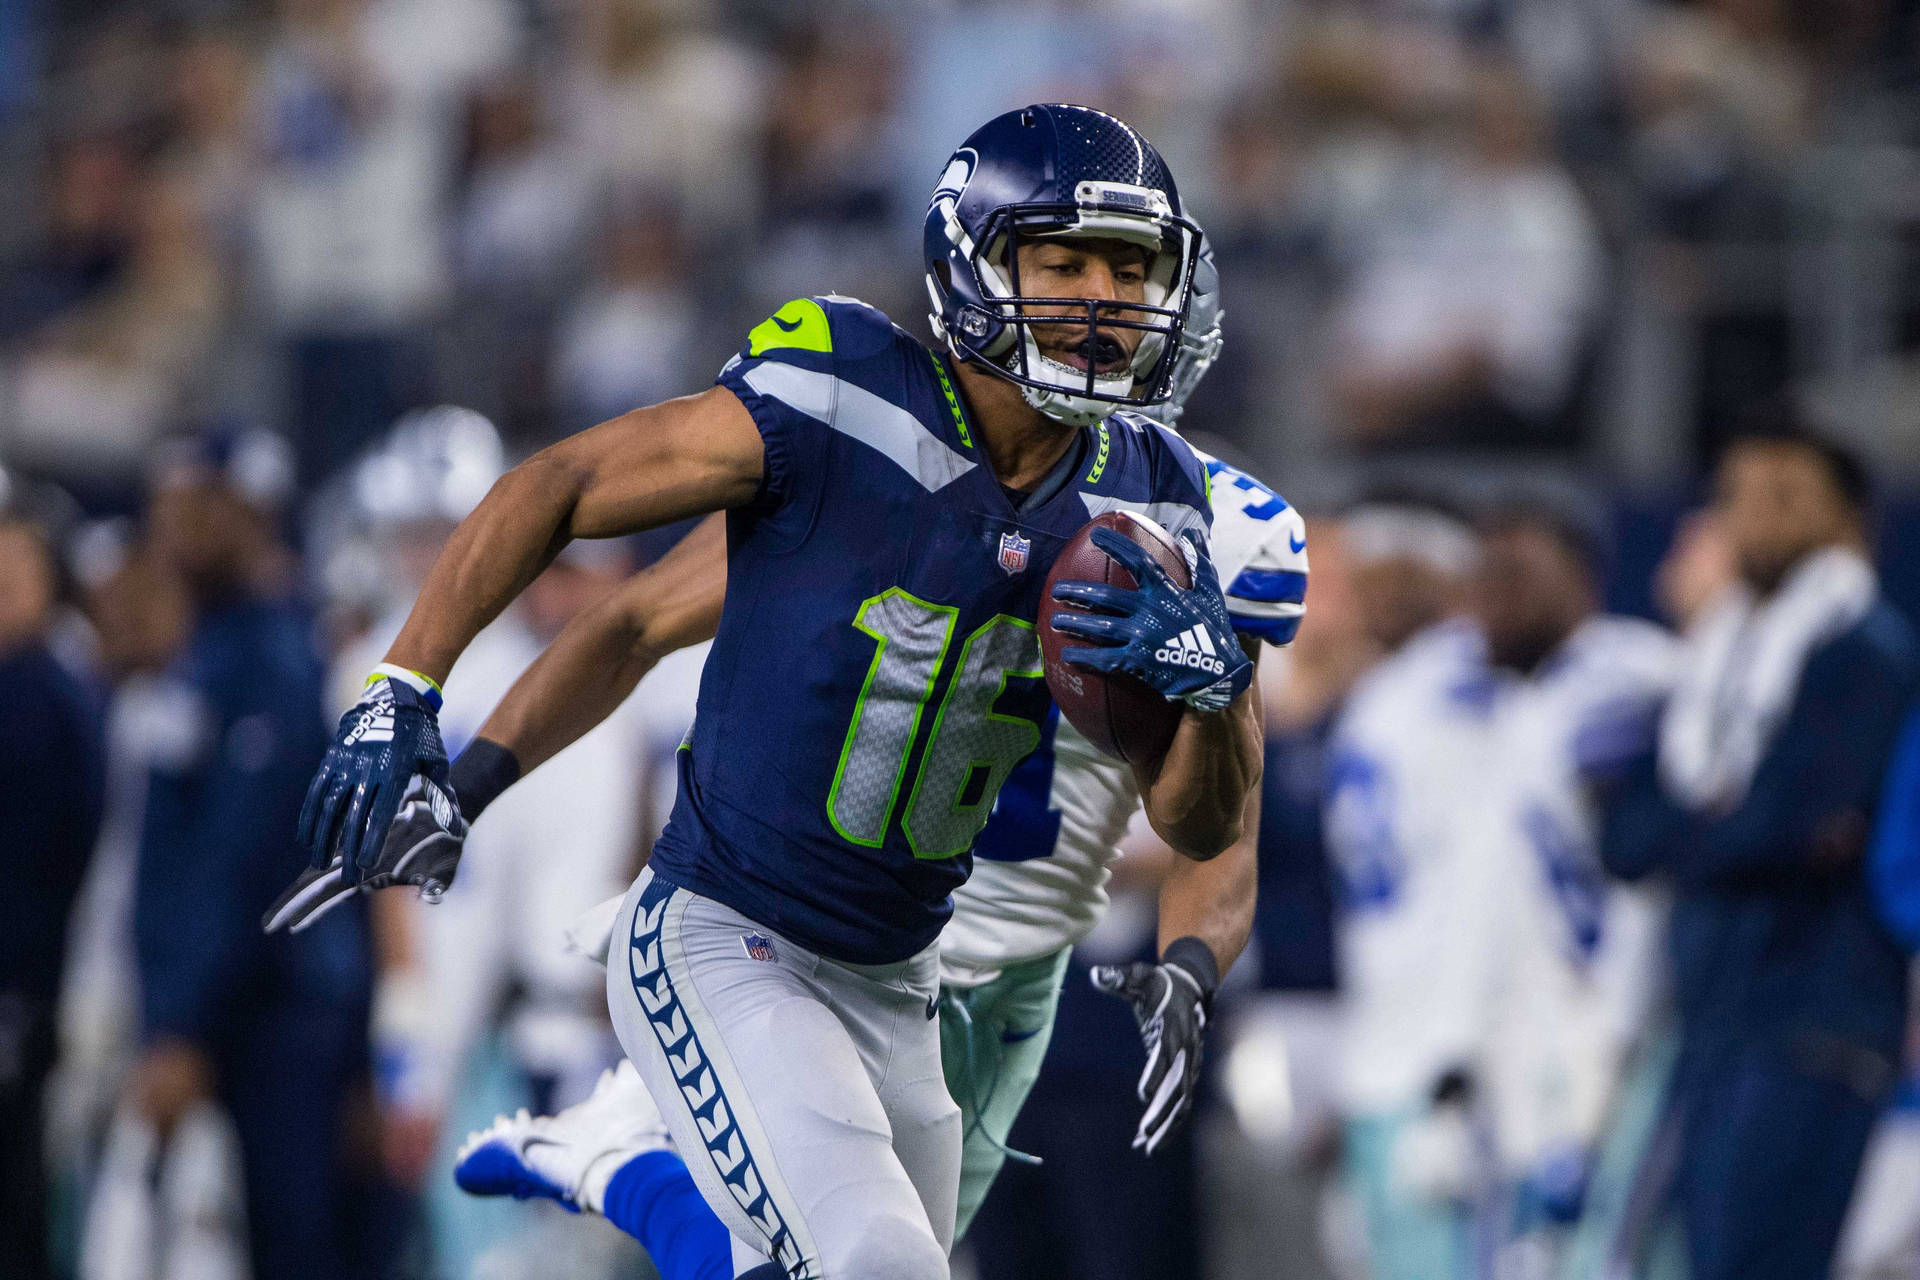 Tyler Lockett DK Metcalf fantasy football startsit advice What to do  with Seahawks WRs in the Wild Card round  DraftKings Network